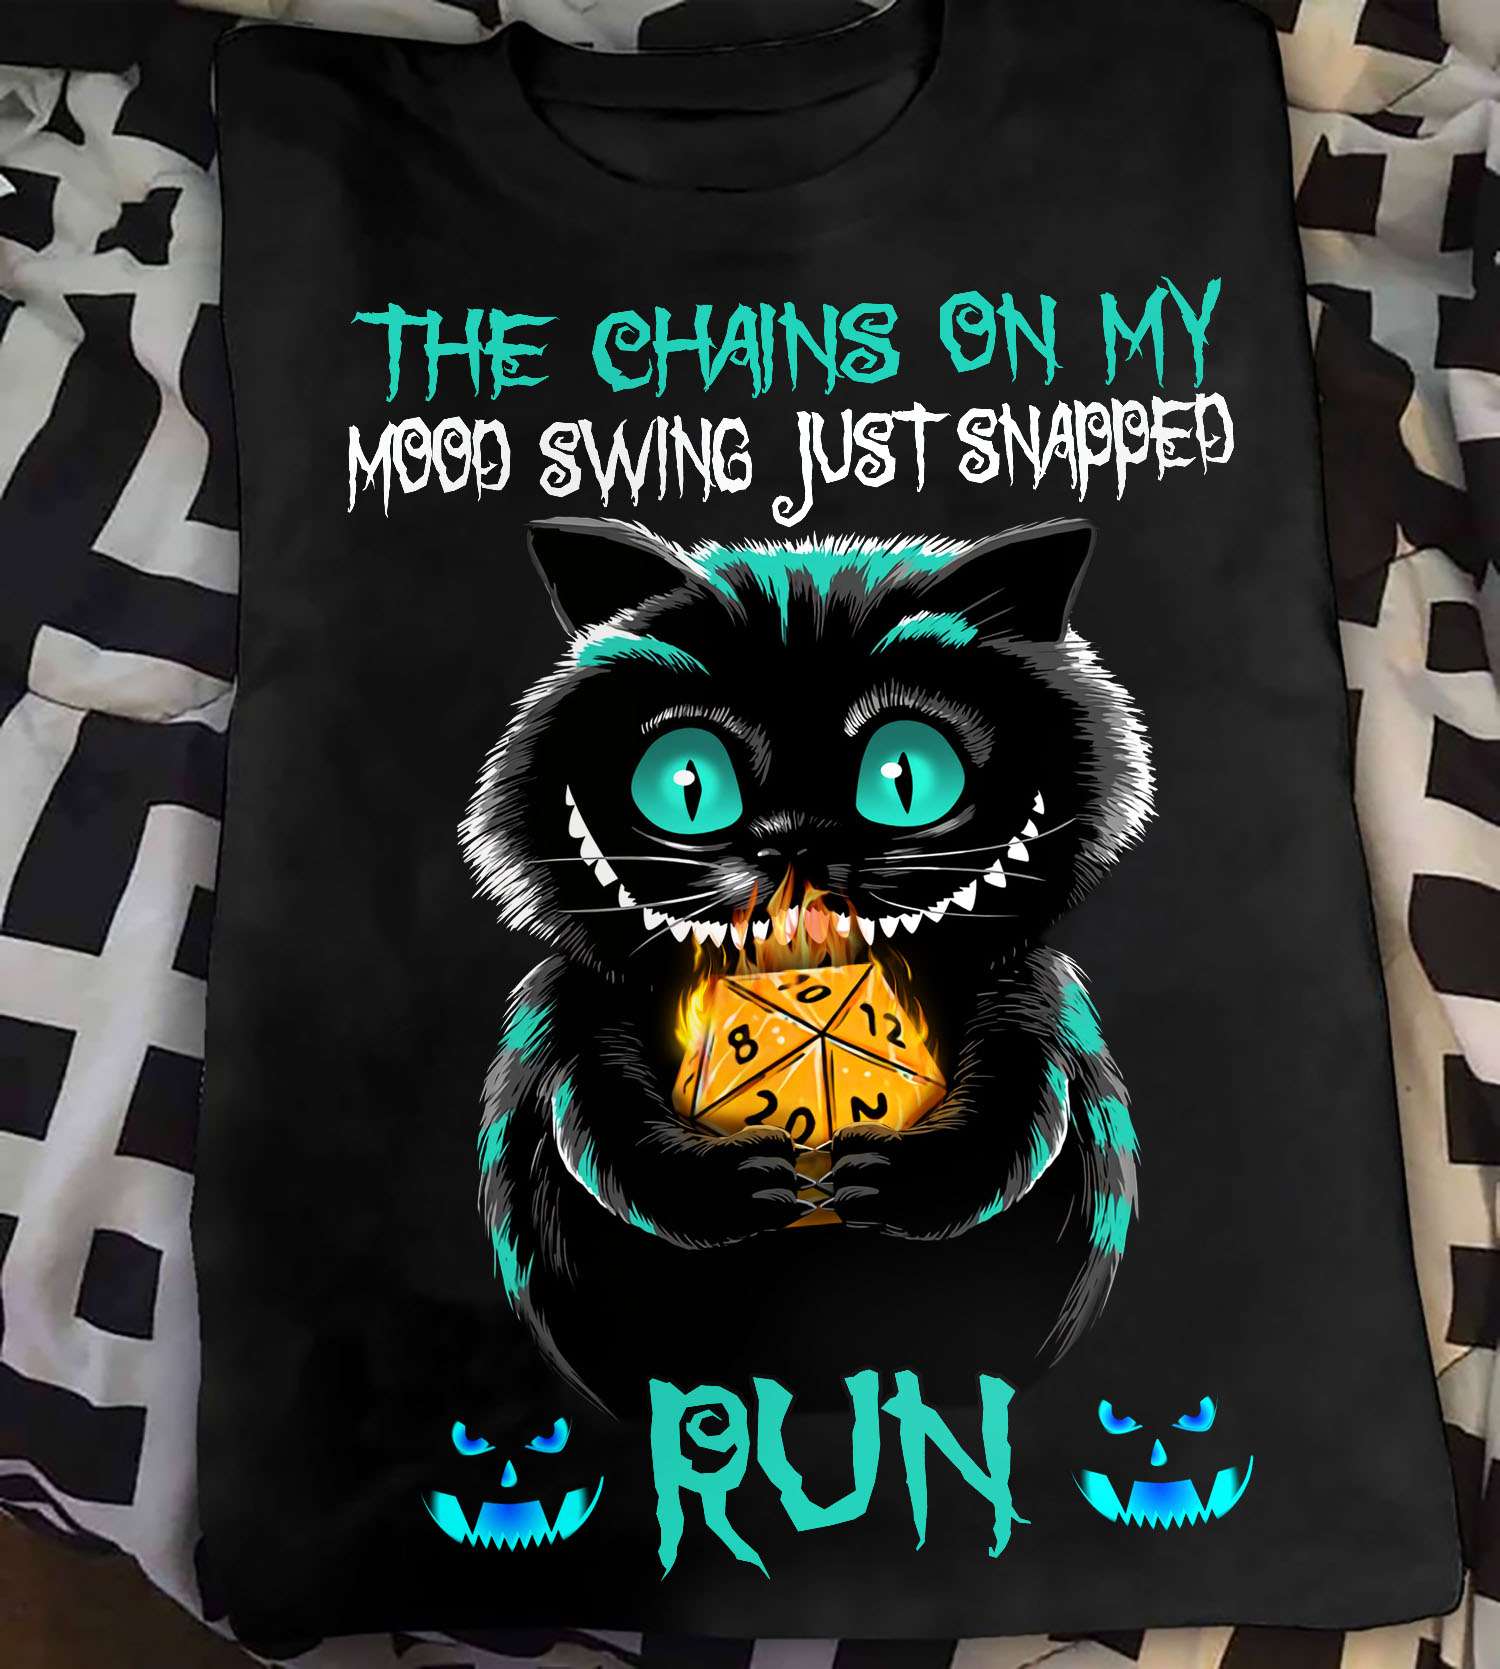 The chains on my mood swing just snapped run - Cheshire cat, rolling initiative